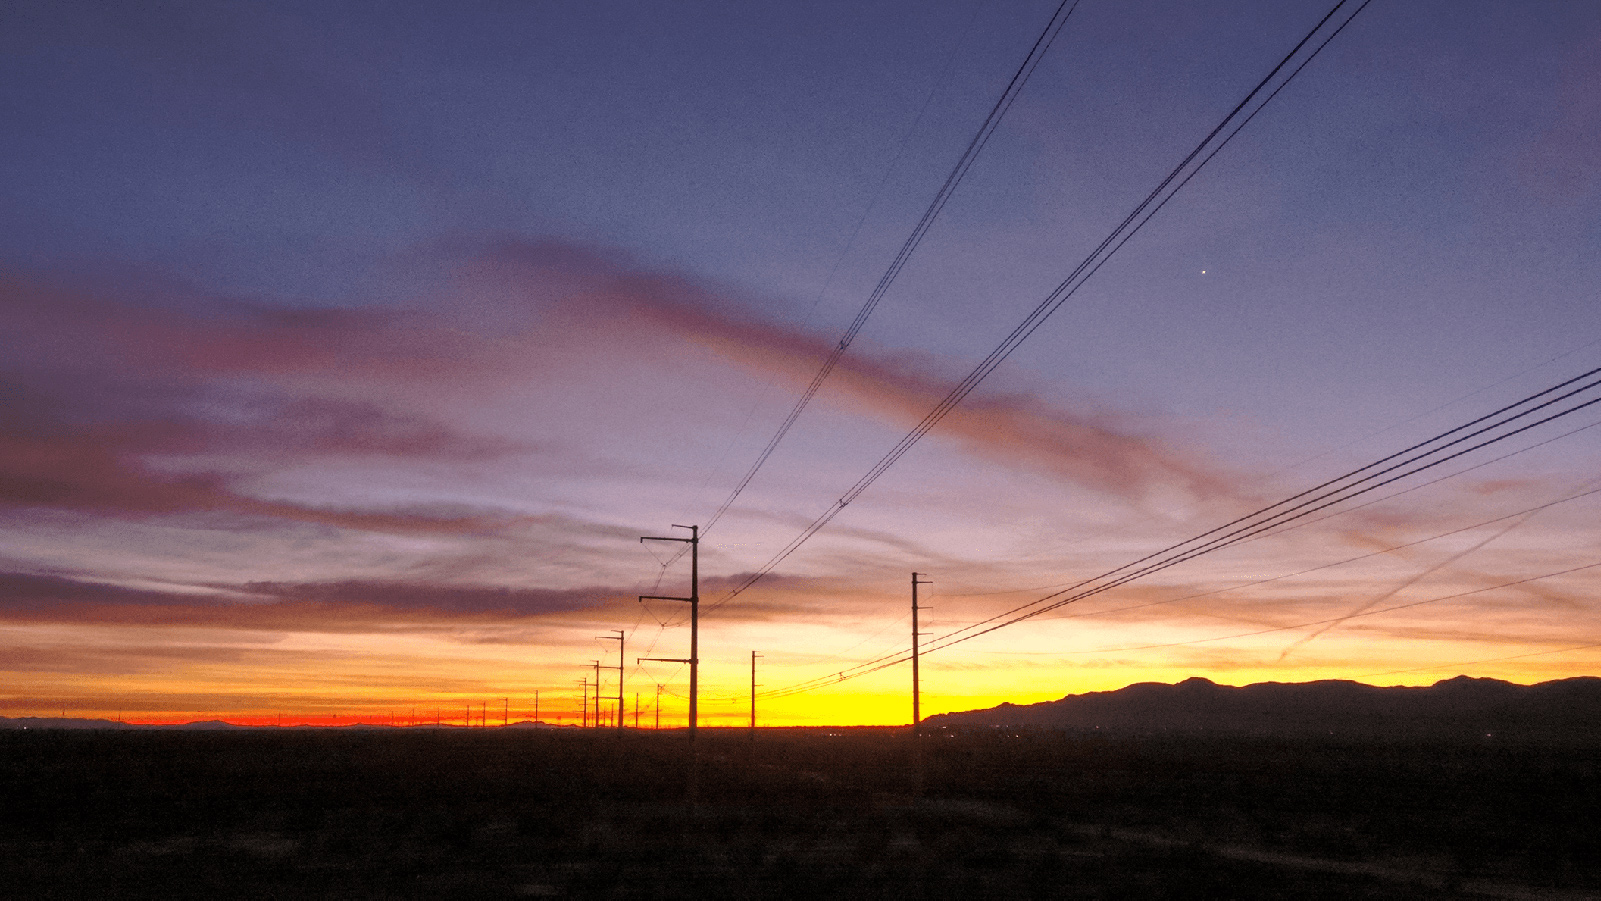 Rural power lines against a purple and yellow sunset.